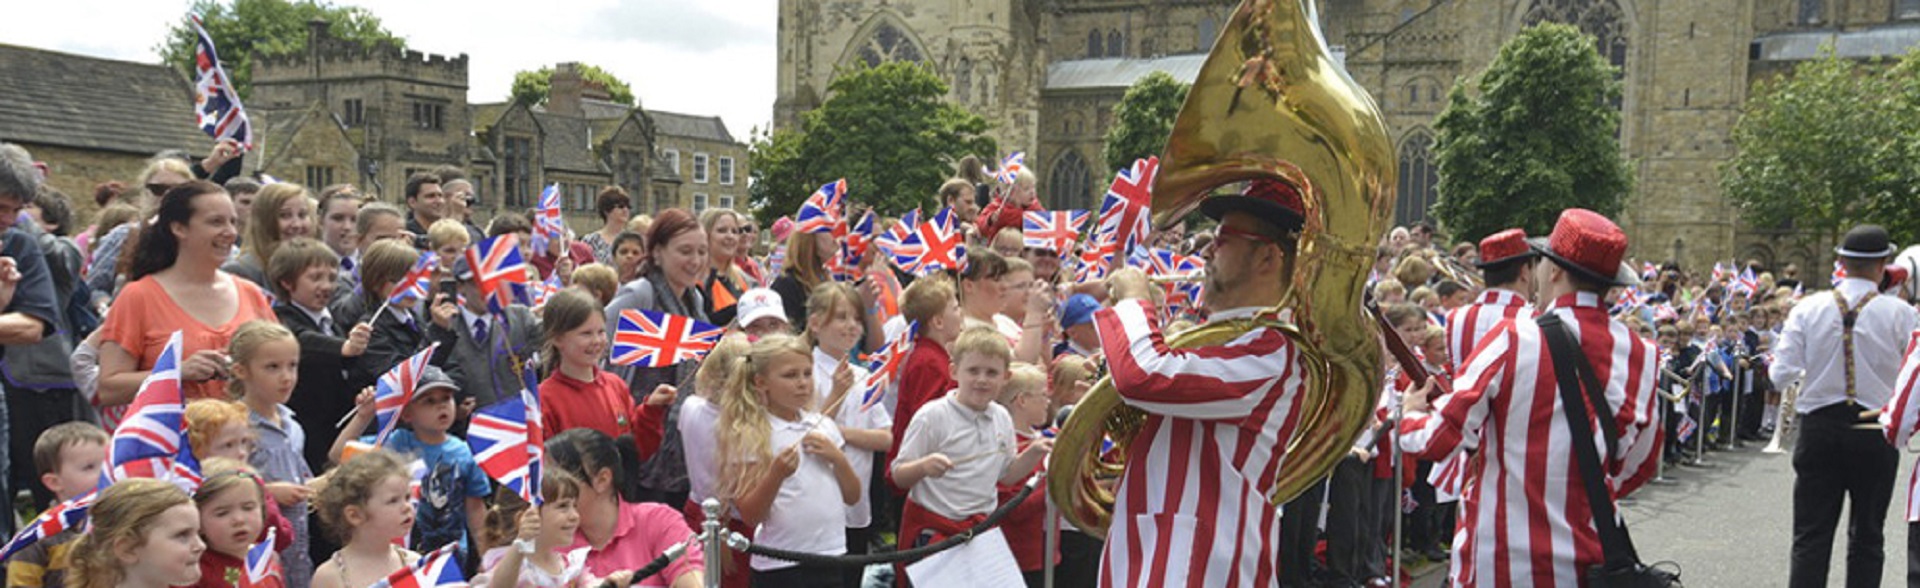 Crowds of people waving Union Jack flags on Palace Green for the Queen's Diamond Jubilee in 2012